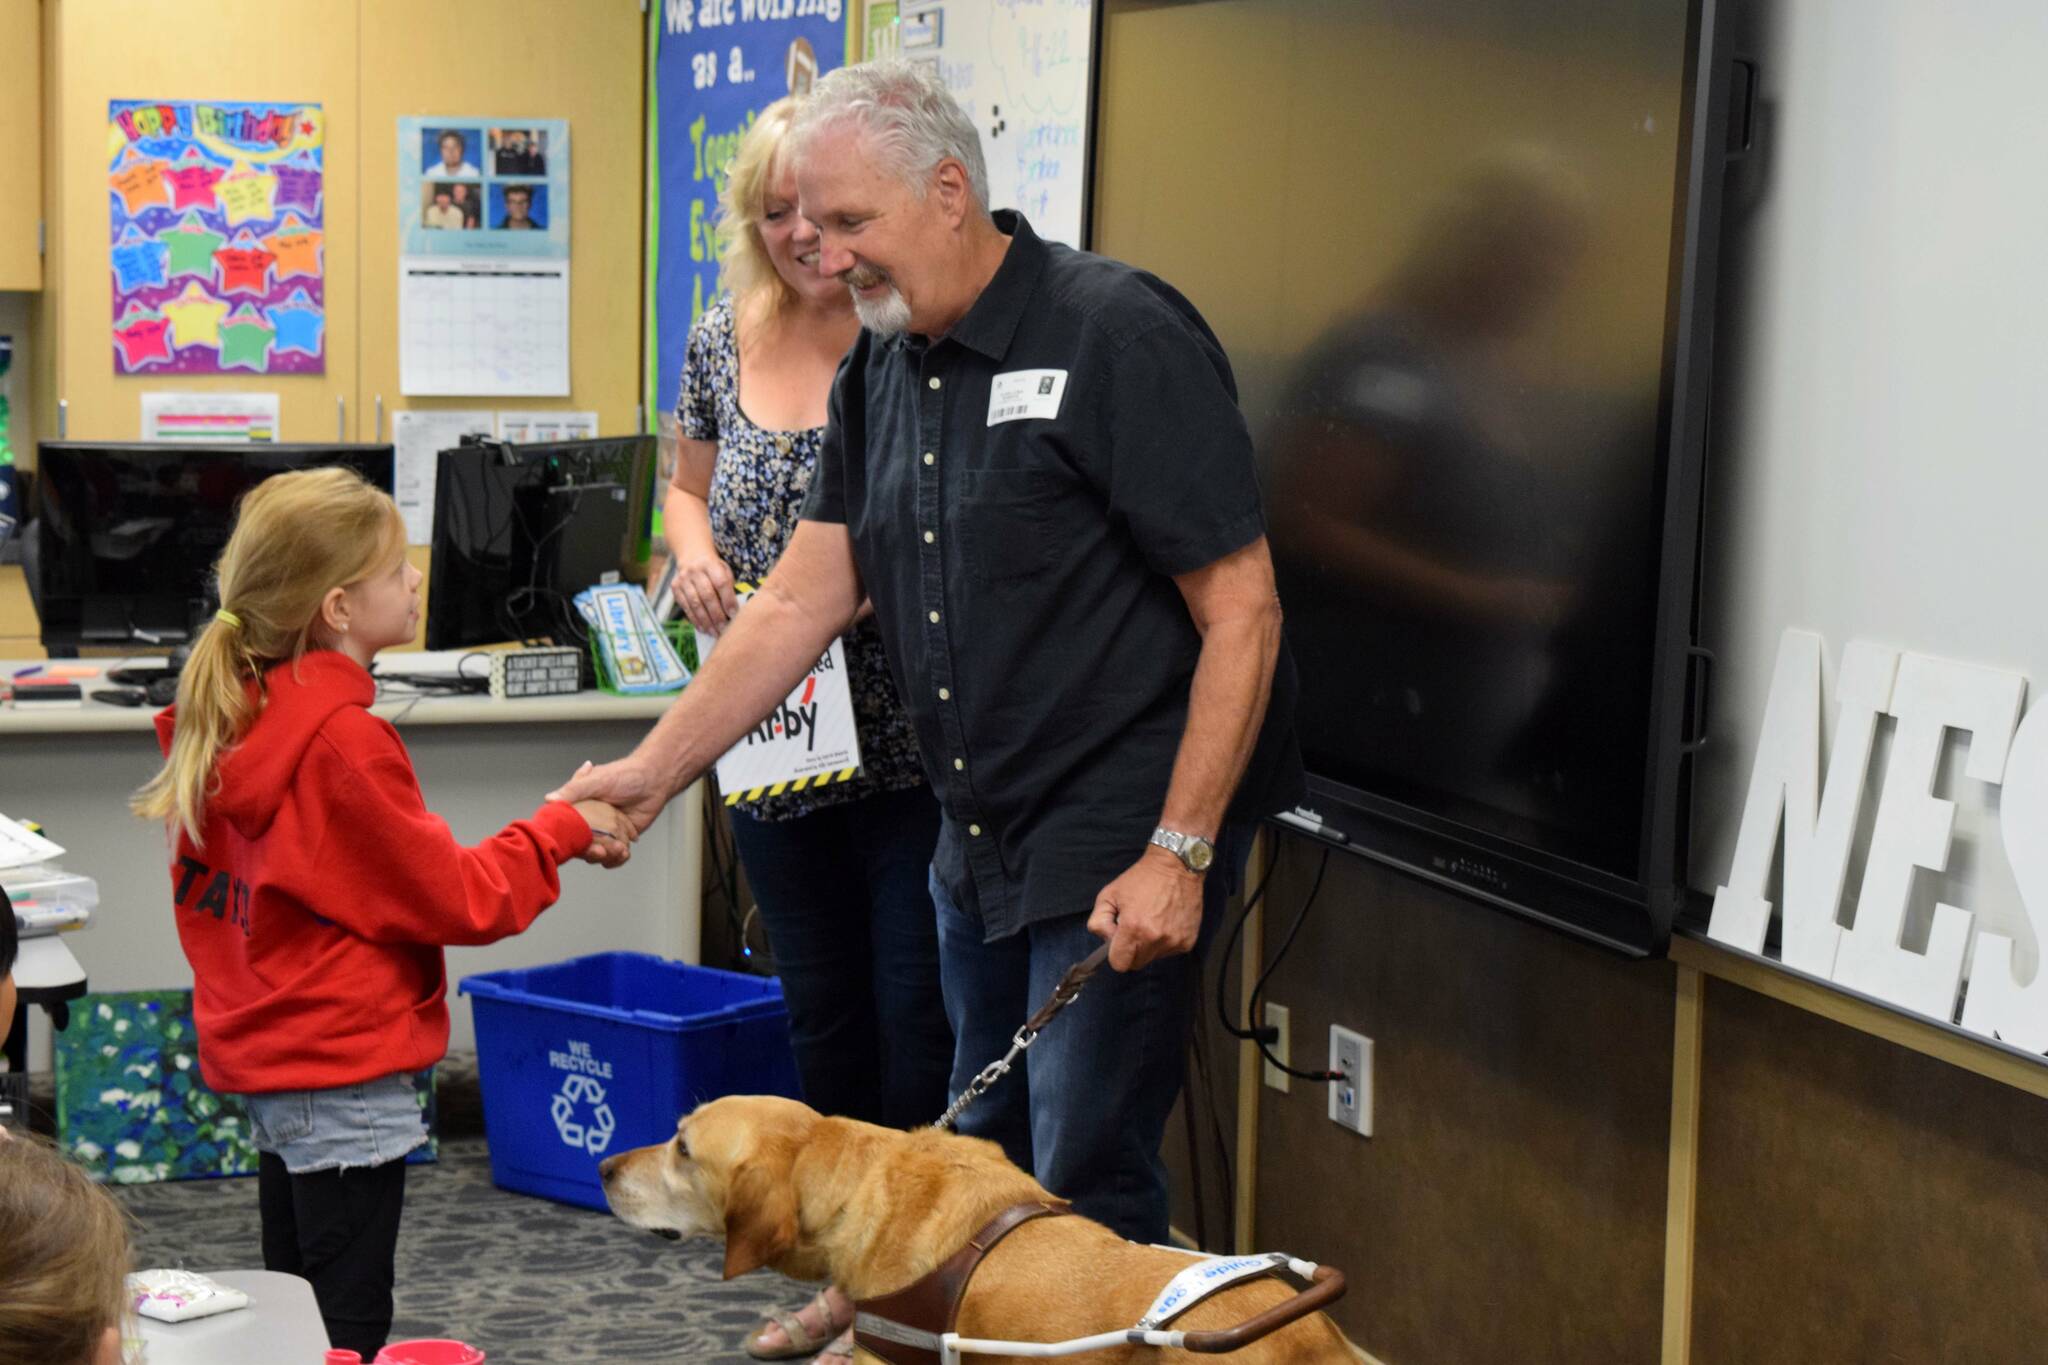 Conor Wilson / Valley Record File photo
Clark Roberts greets a student at North Bend Elementary on Sept. 16, 2022.